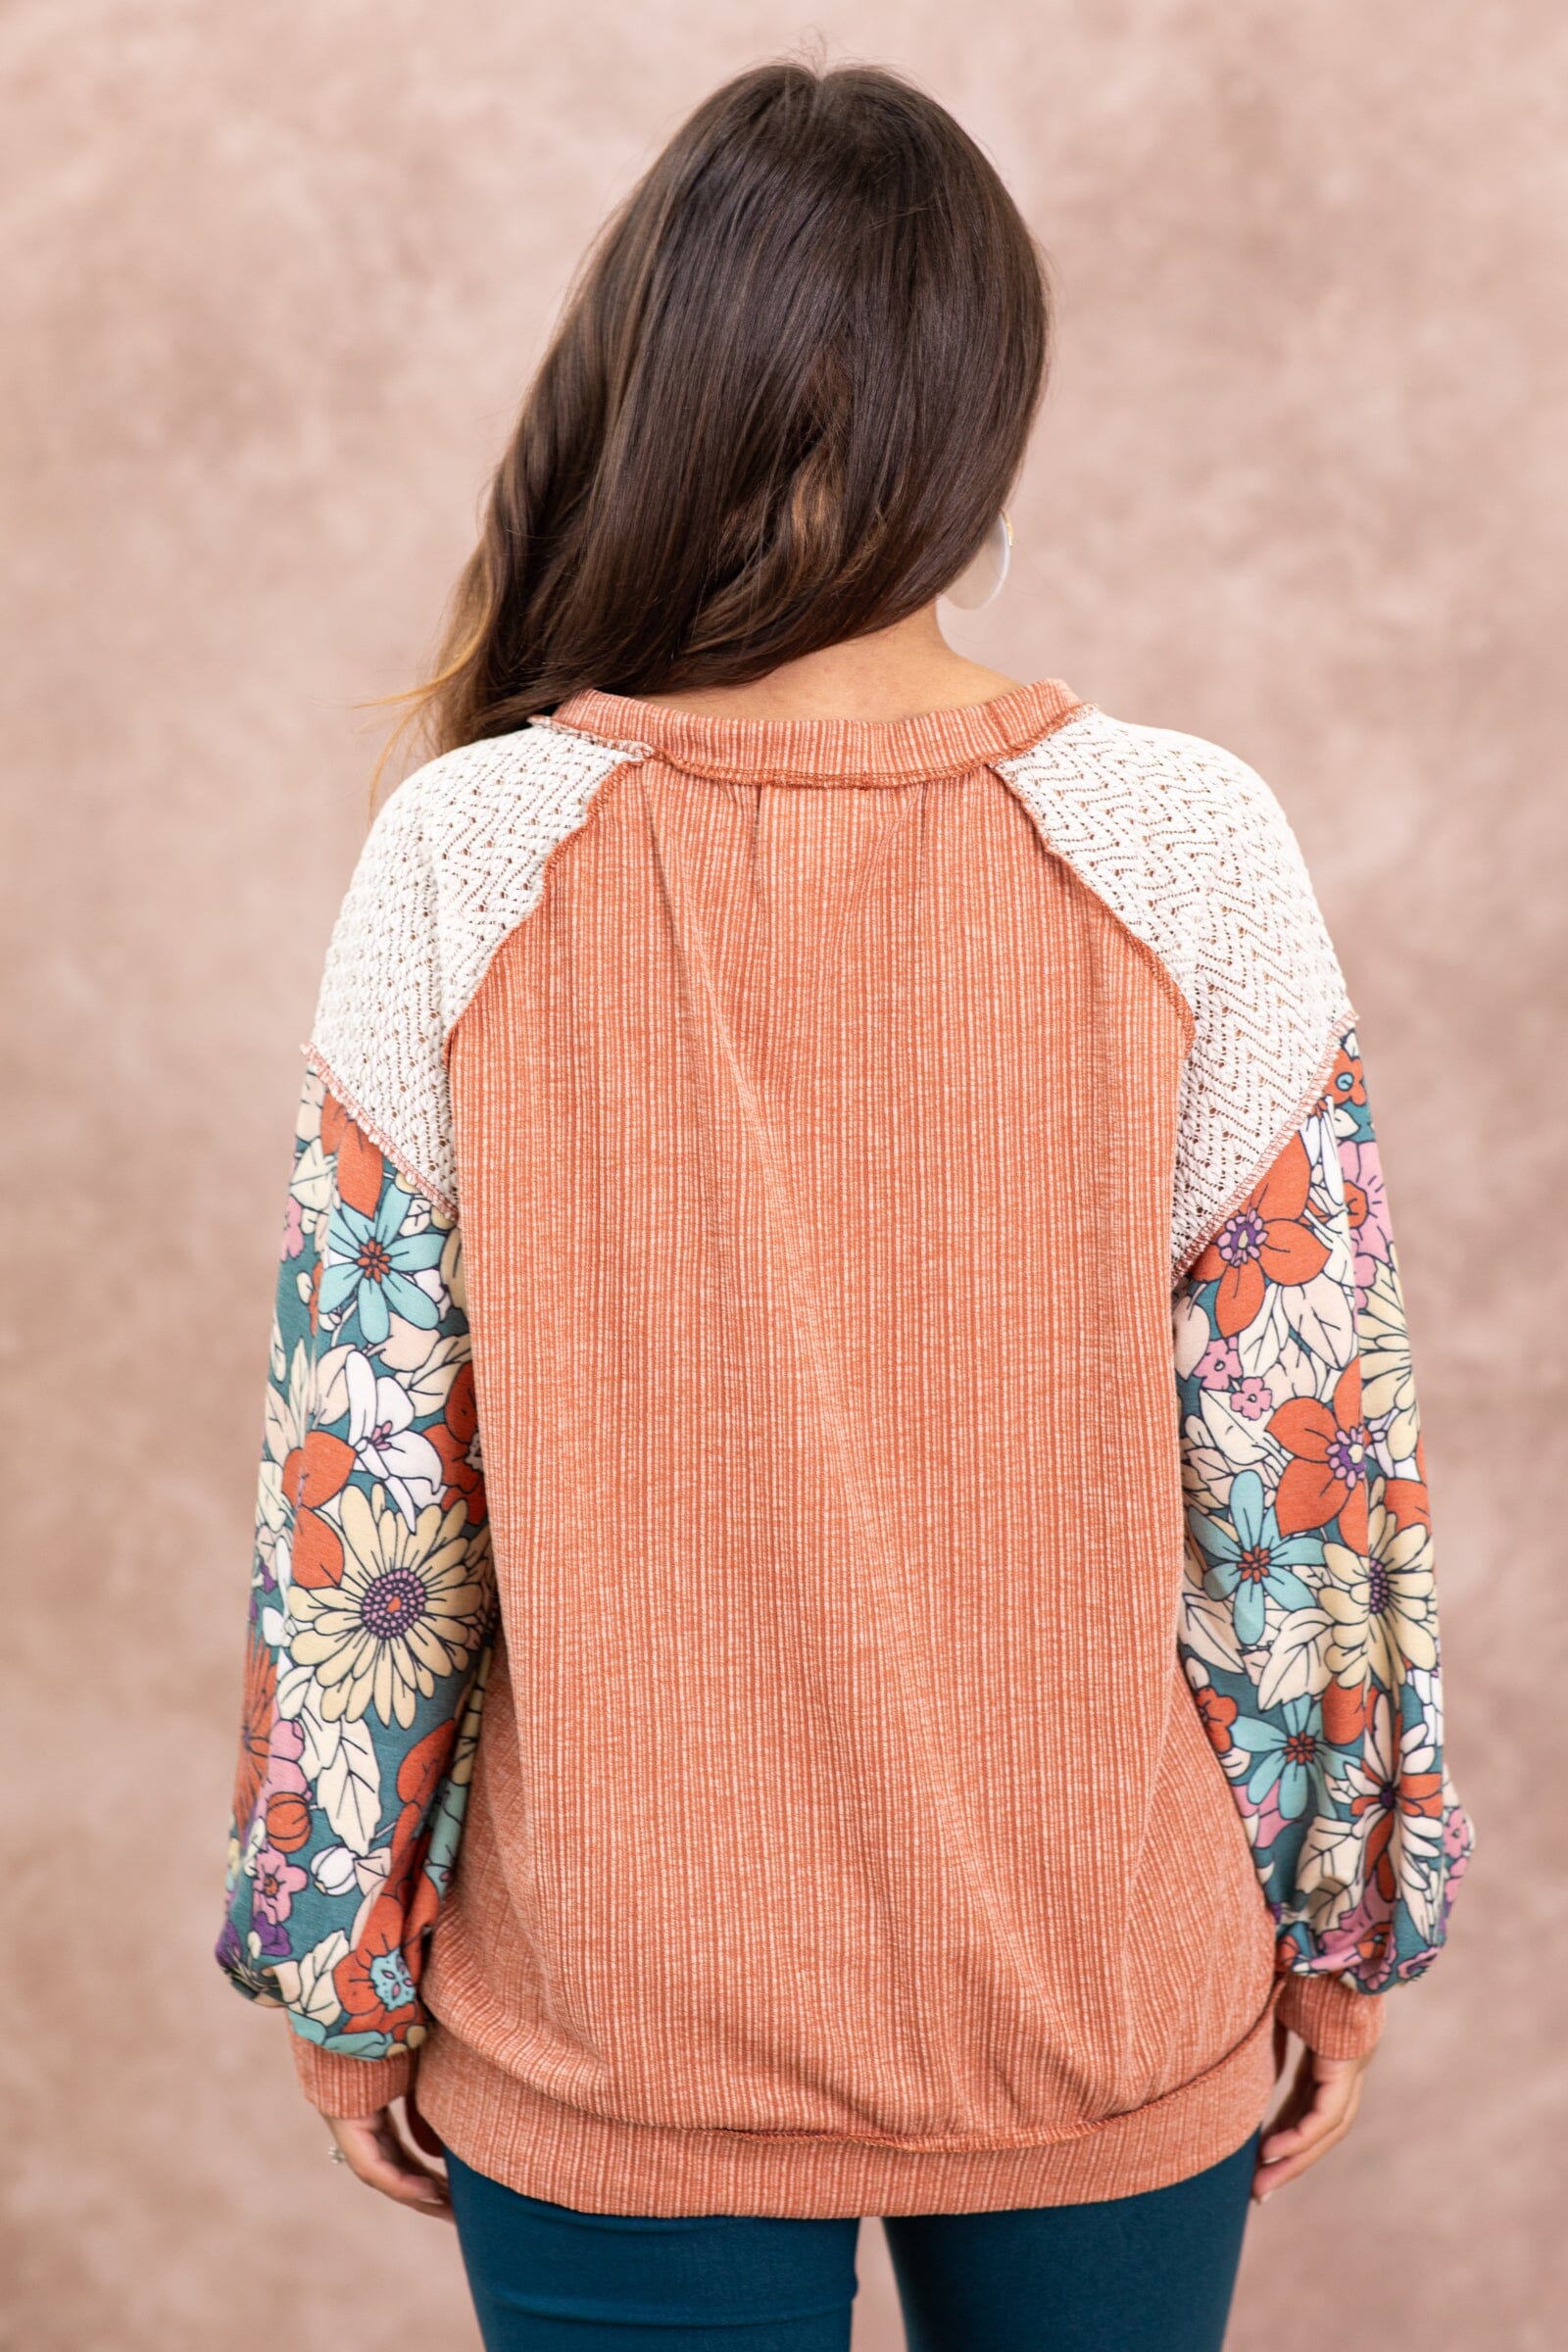 Burnt Orange and Teal Floral Print Sleeve - Filly Flair